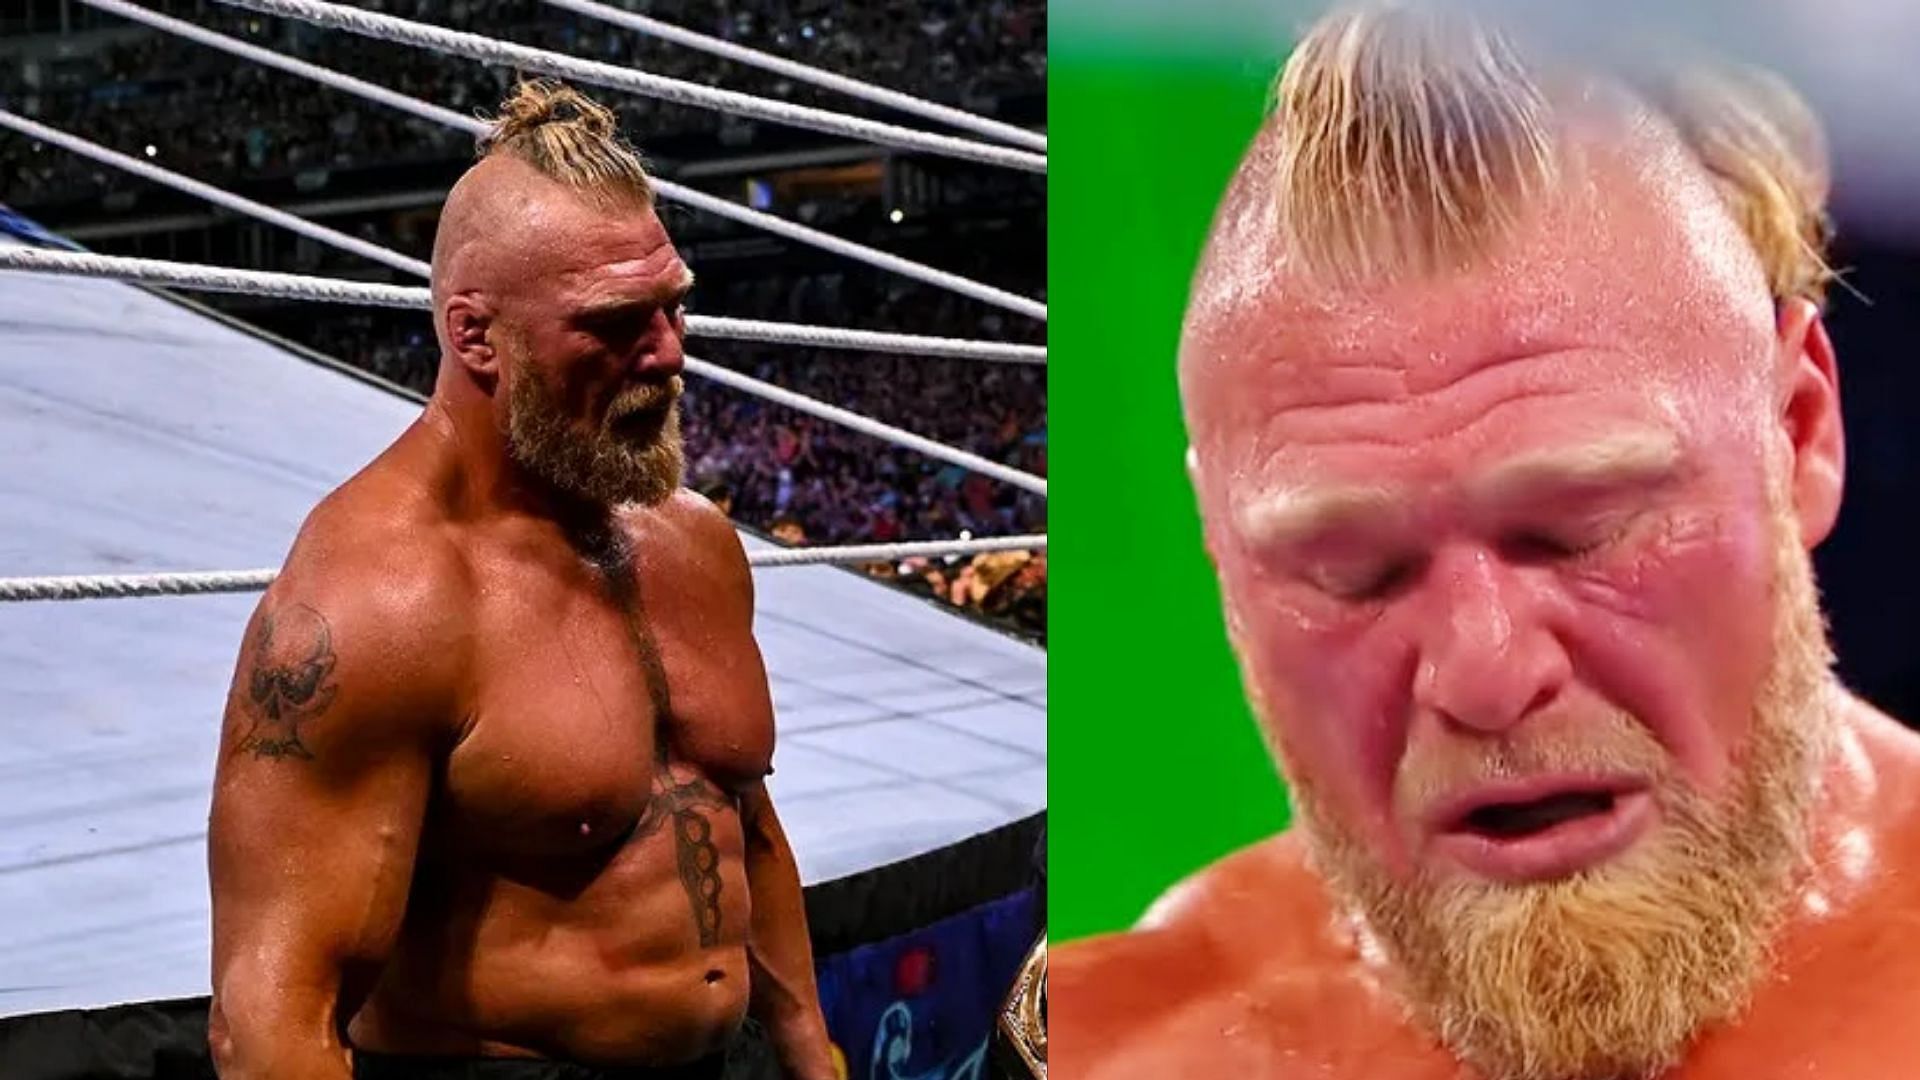 Brock Lesnar might be done with wrestling soon